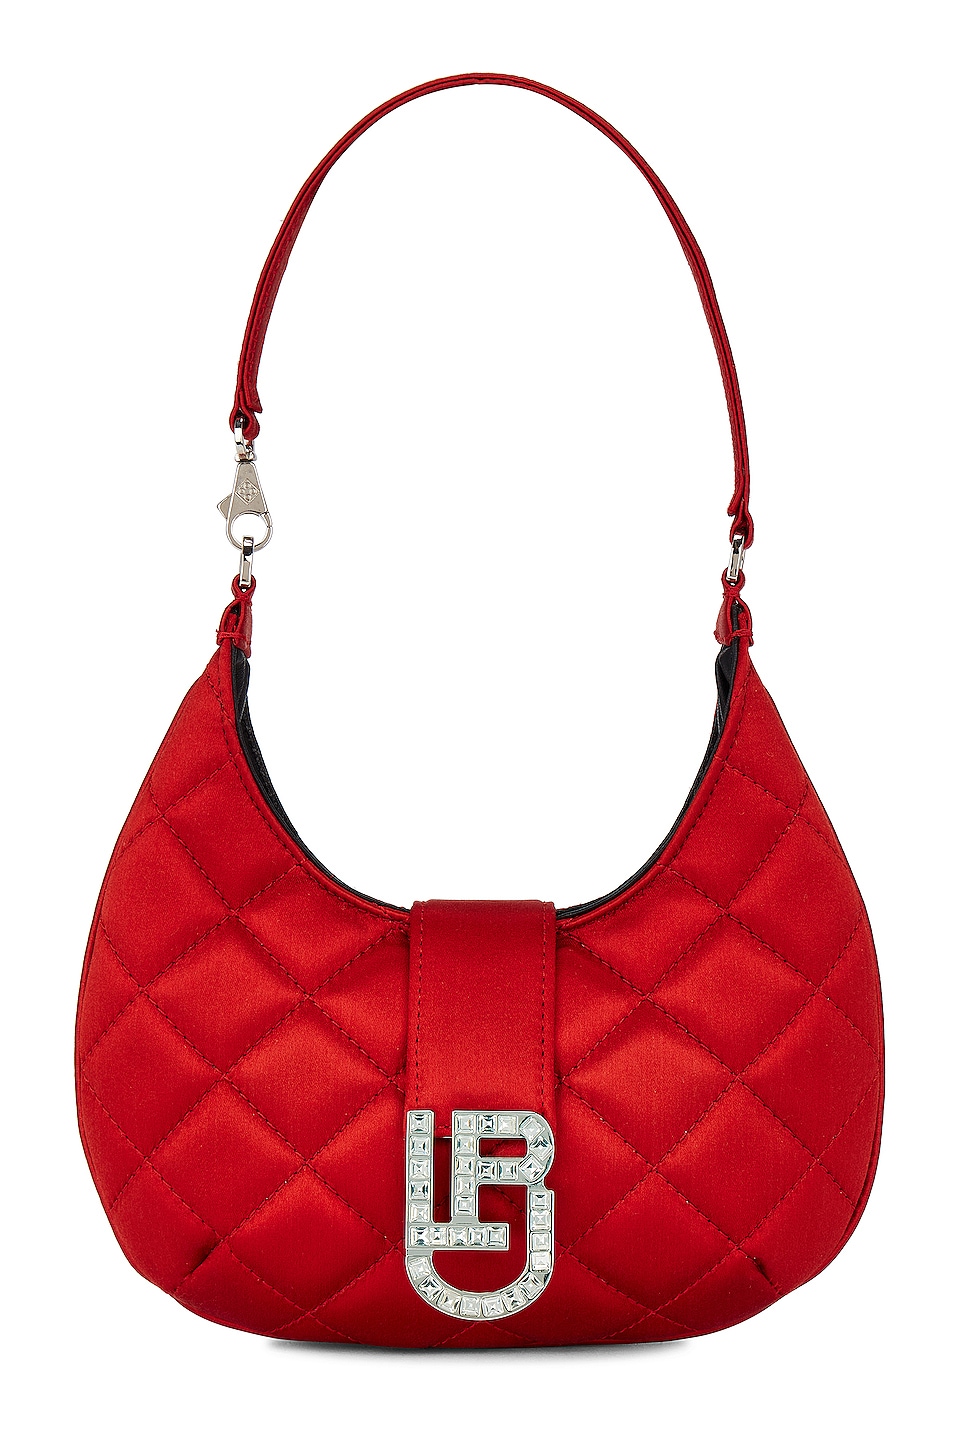 Image 1 of Cindy Baguette Bag in Satin Matellasse Red & Strass Crystal